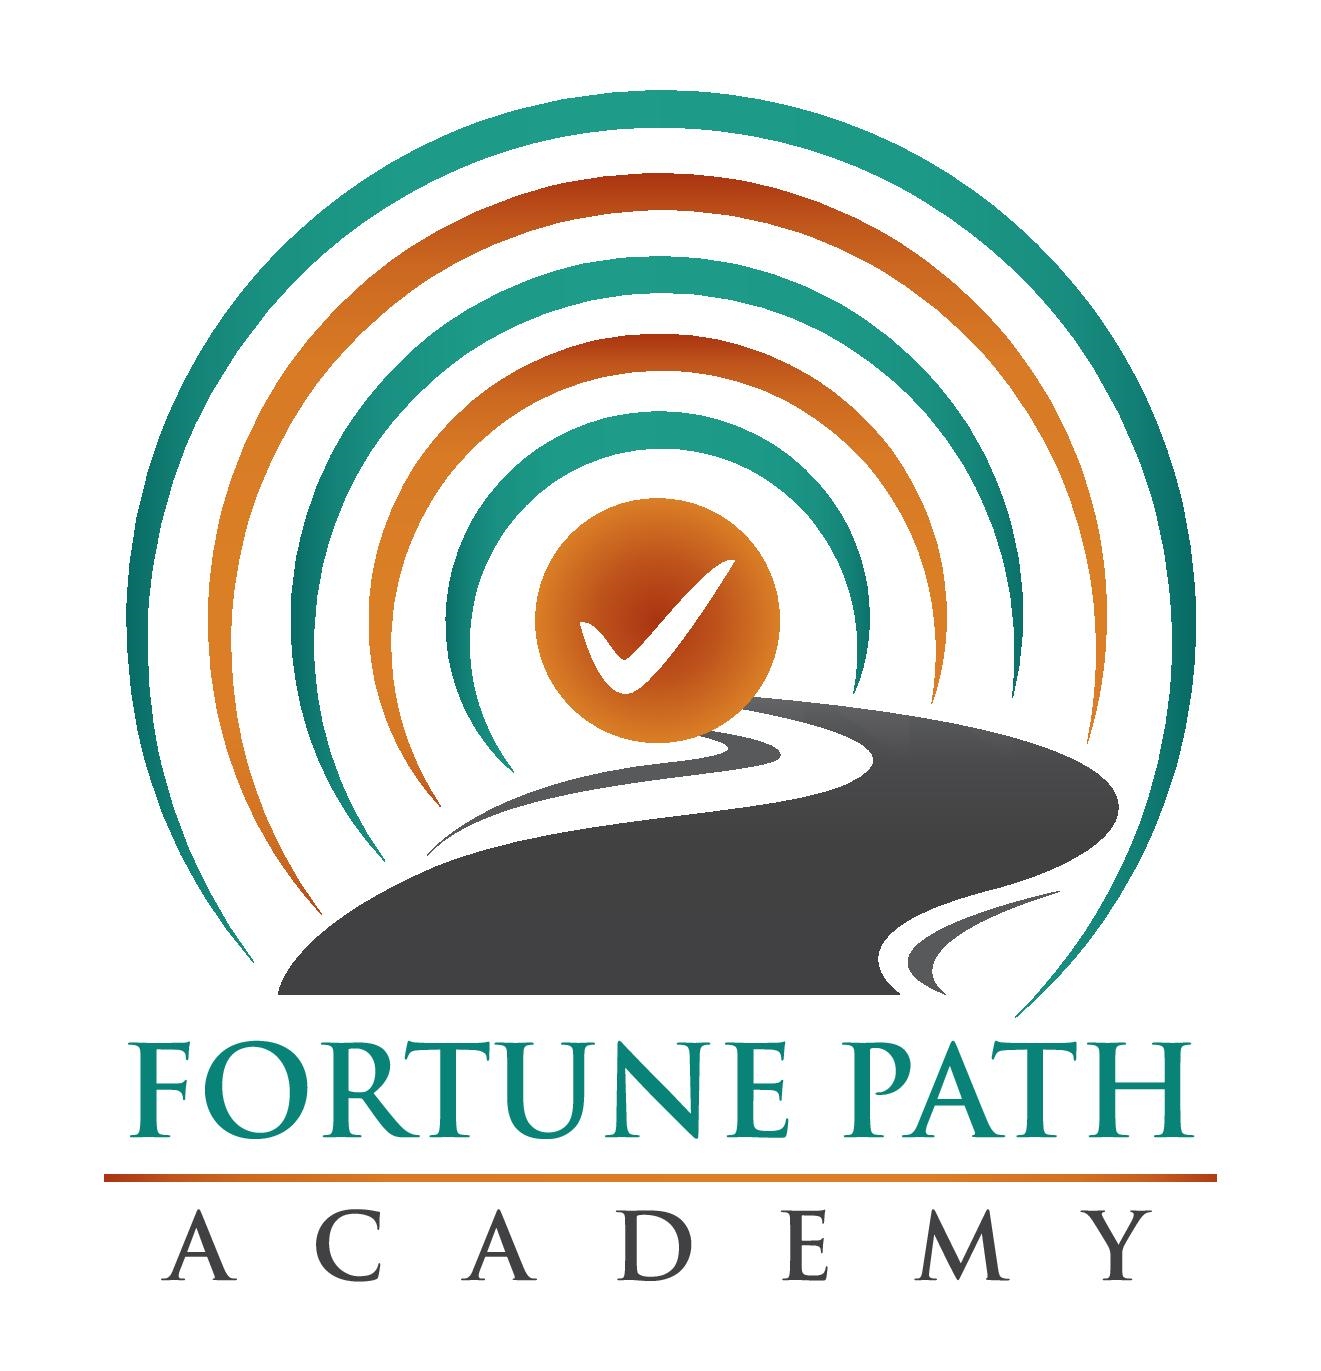 Fortune Path Academy